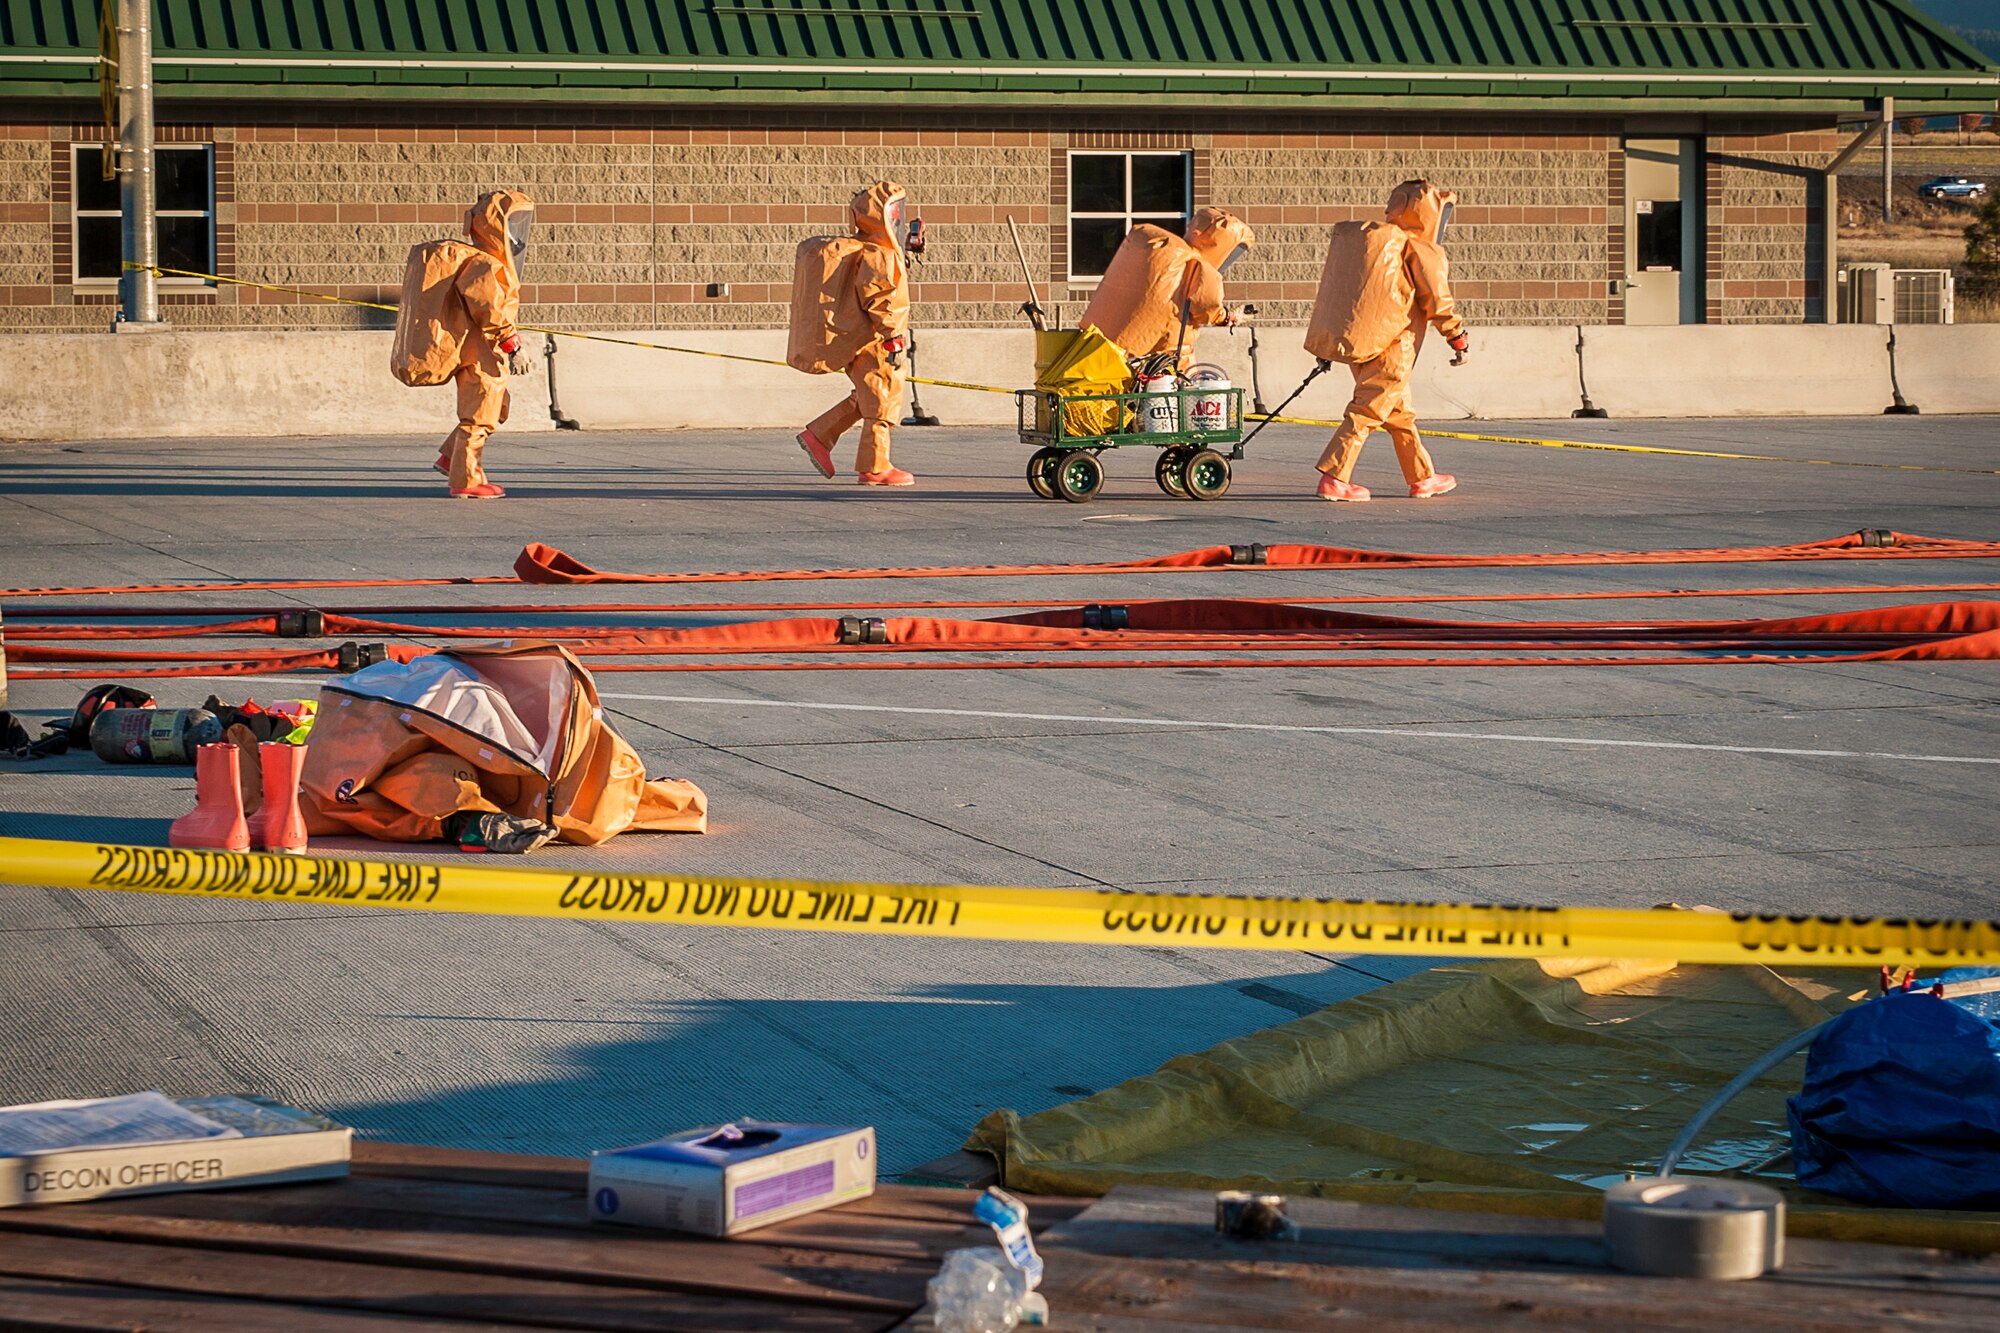 Firefighters from the 92nd Civil Engineer Squadron other regional fire departments walk in hazardous material suits as they enter the spill zone of a HAZMAT incident Sept. 14, 2014, near the Washington-Idaho state line. A tanker truck leaking anhydrous trimethylamine, a flammable substance used in making solvents, animal feed supplements and products consumed by the paper, oil and gas industries, prompted emergency responders to shut down Interstate 90 garnering immense regional response including Fairchild Air Force Base firefighters. (U.S. Air Force photo/Staff Sgt. Benjamin W. Stratton)